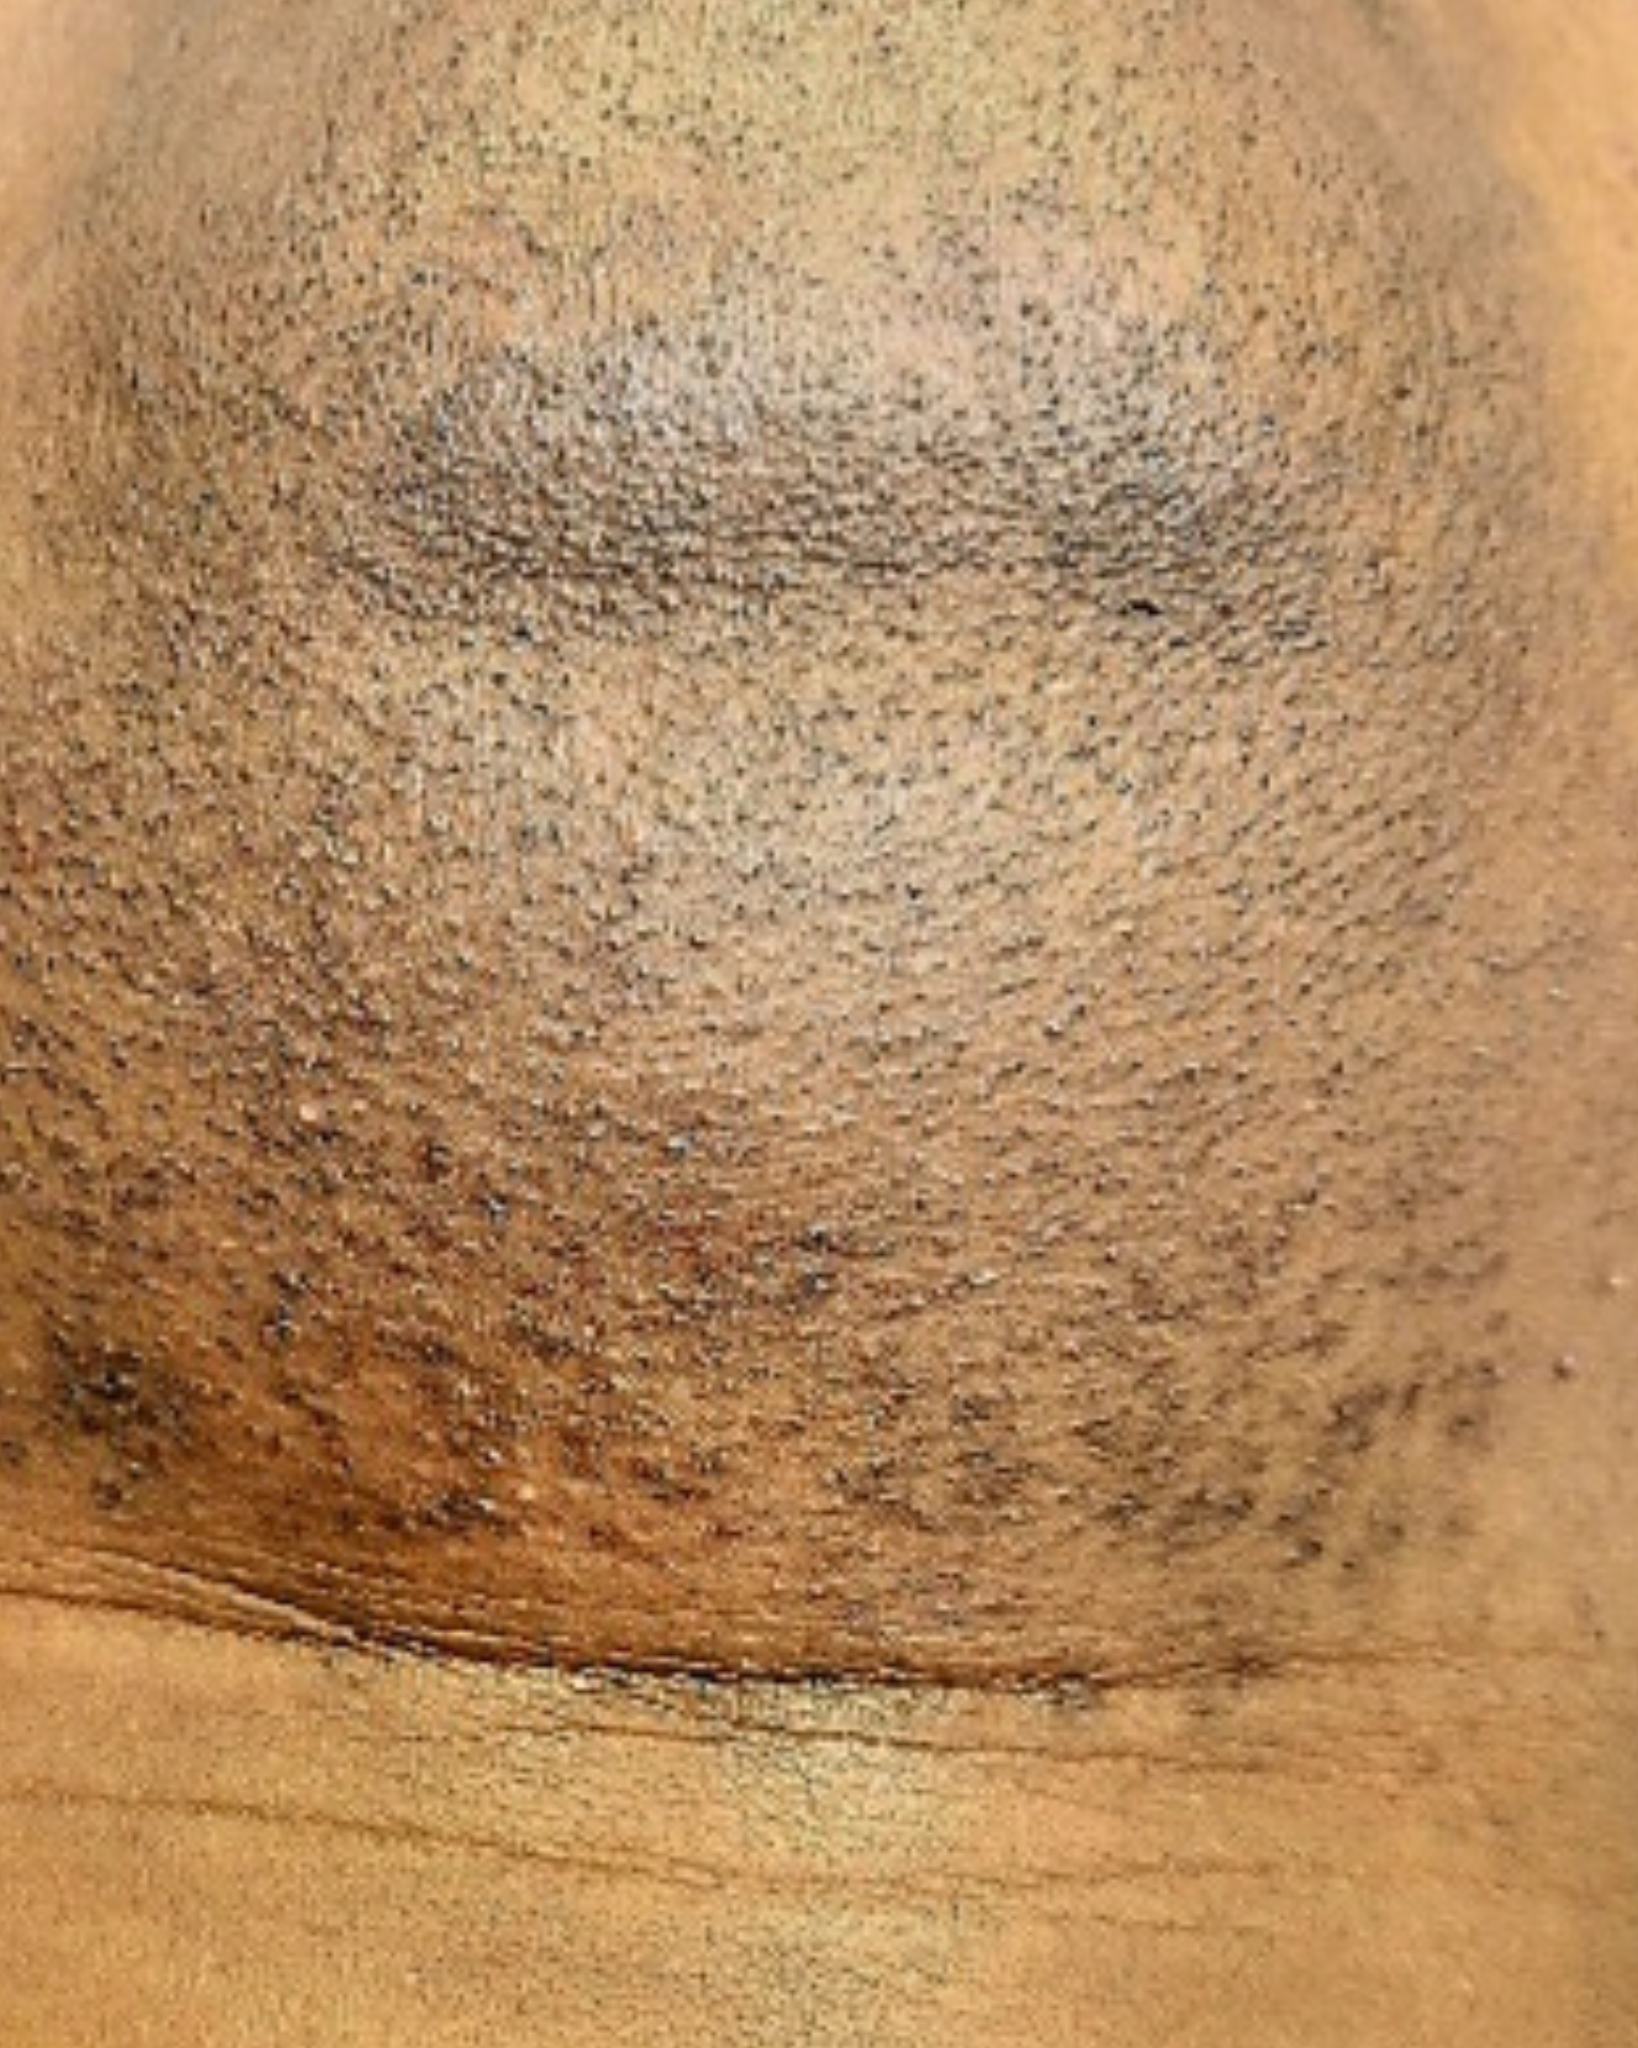 Laser Hair Removal Hair Line Clean Up (21)